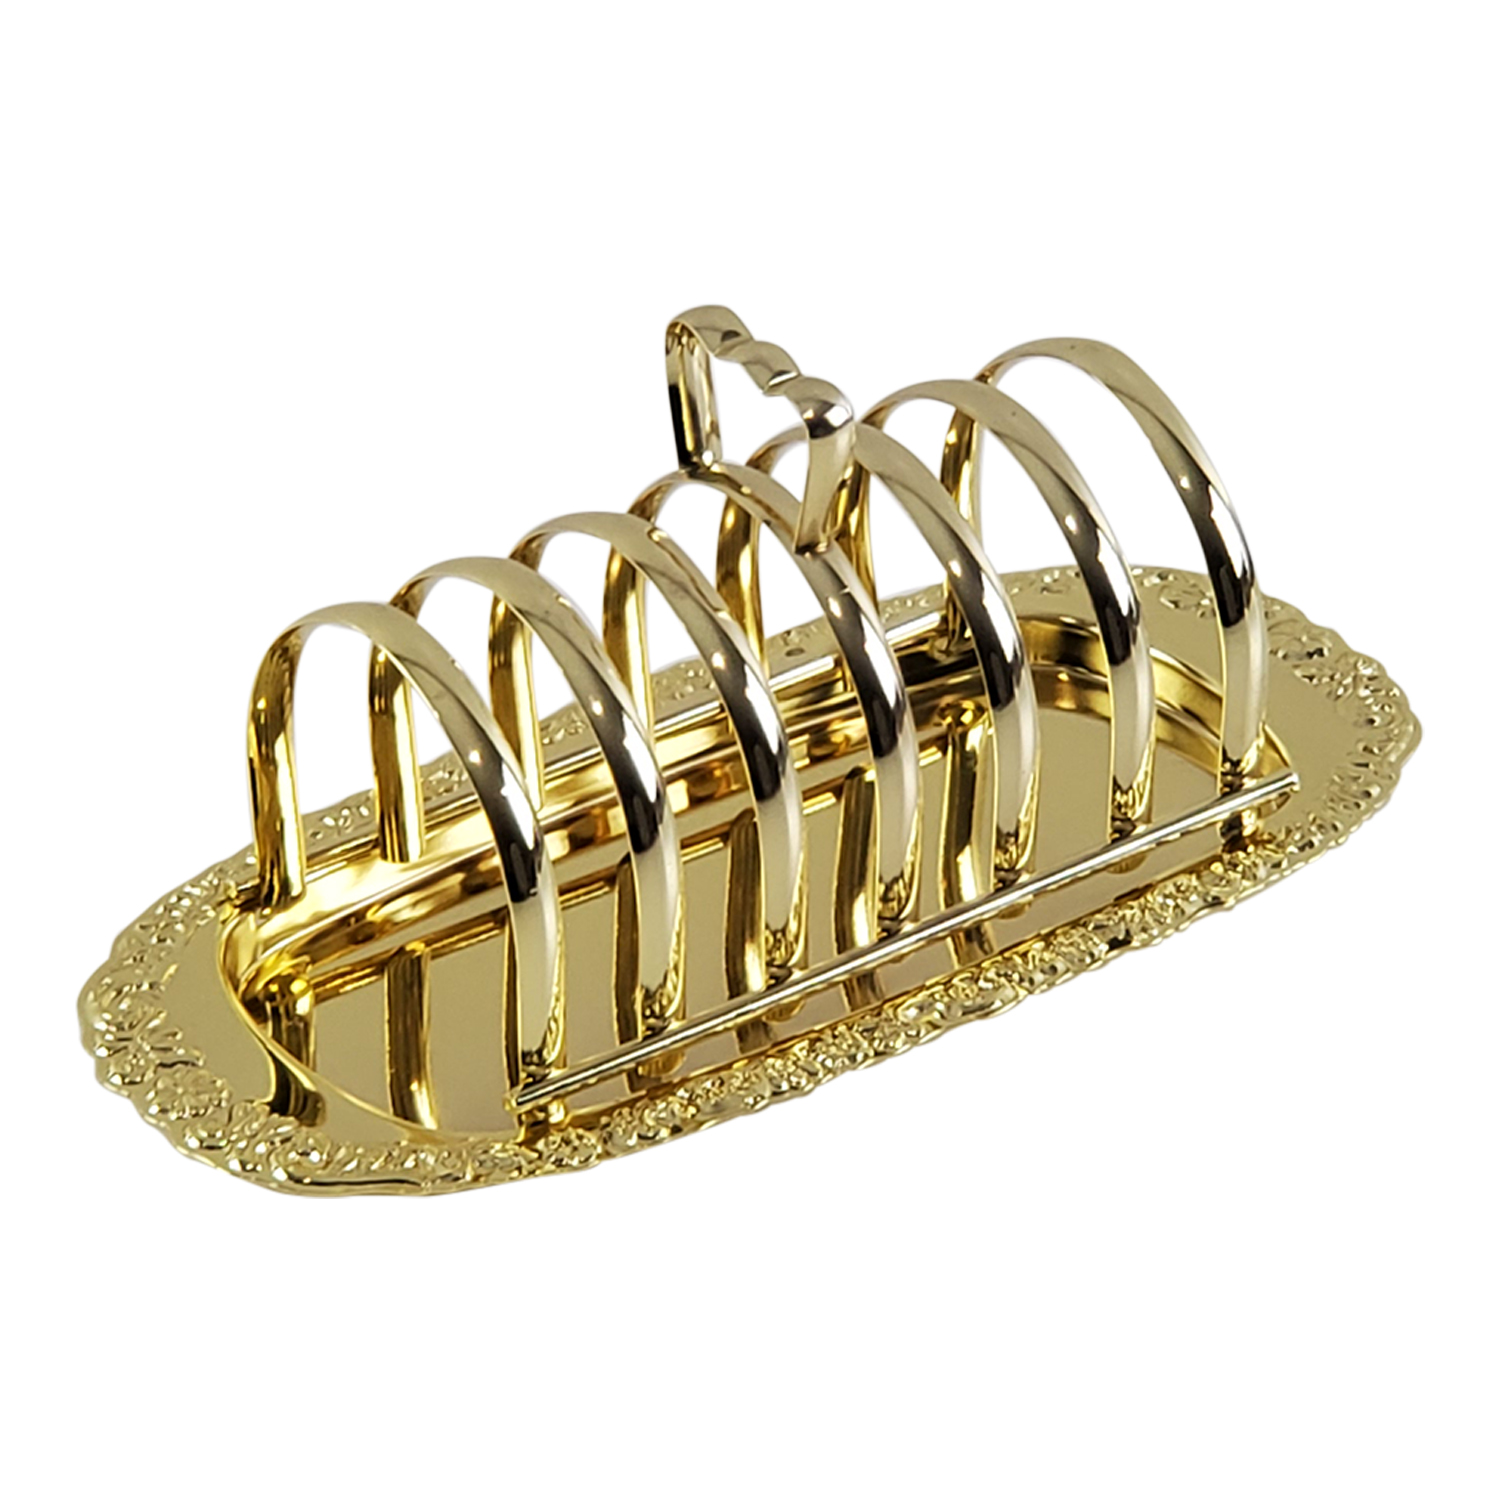 Metal Toast Rack - Gold-colored - Home All